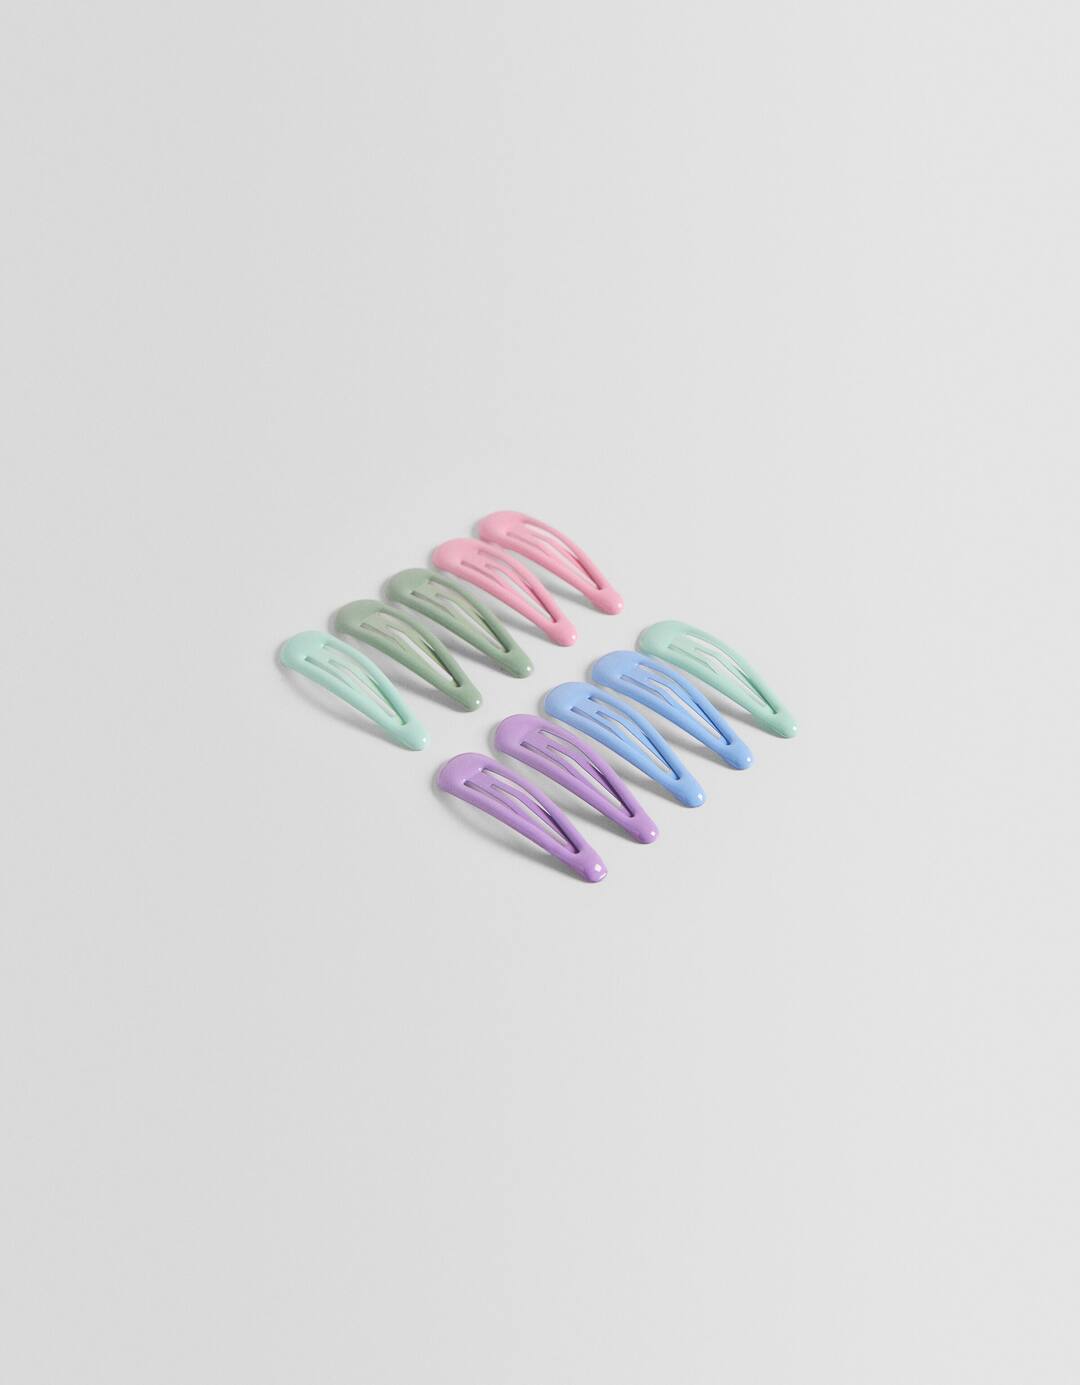 Set of 10 hair clips